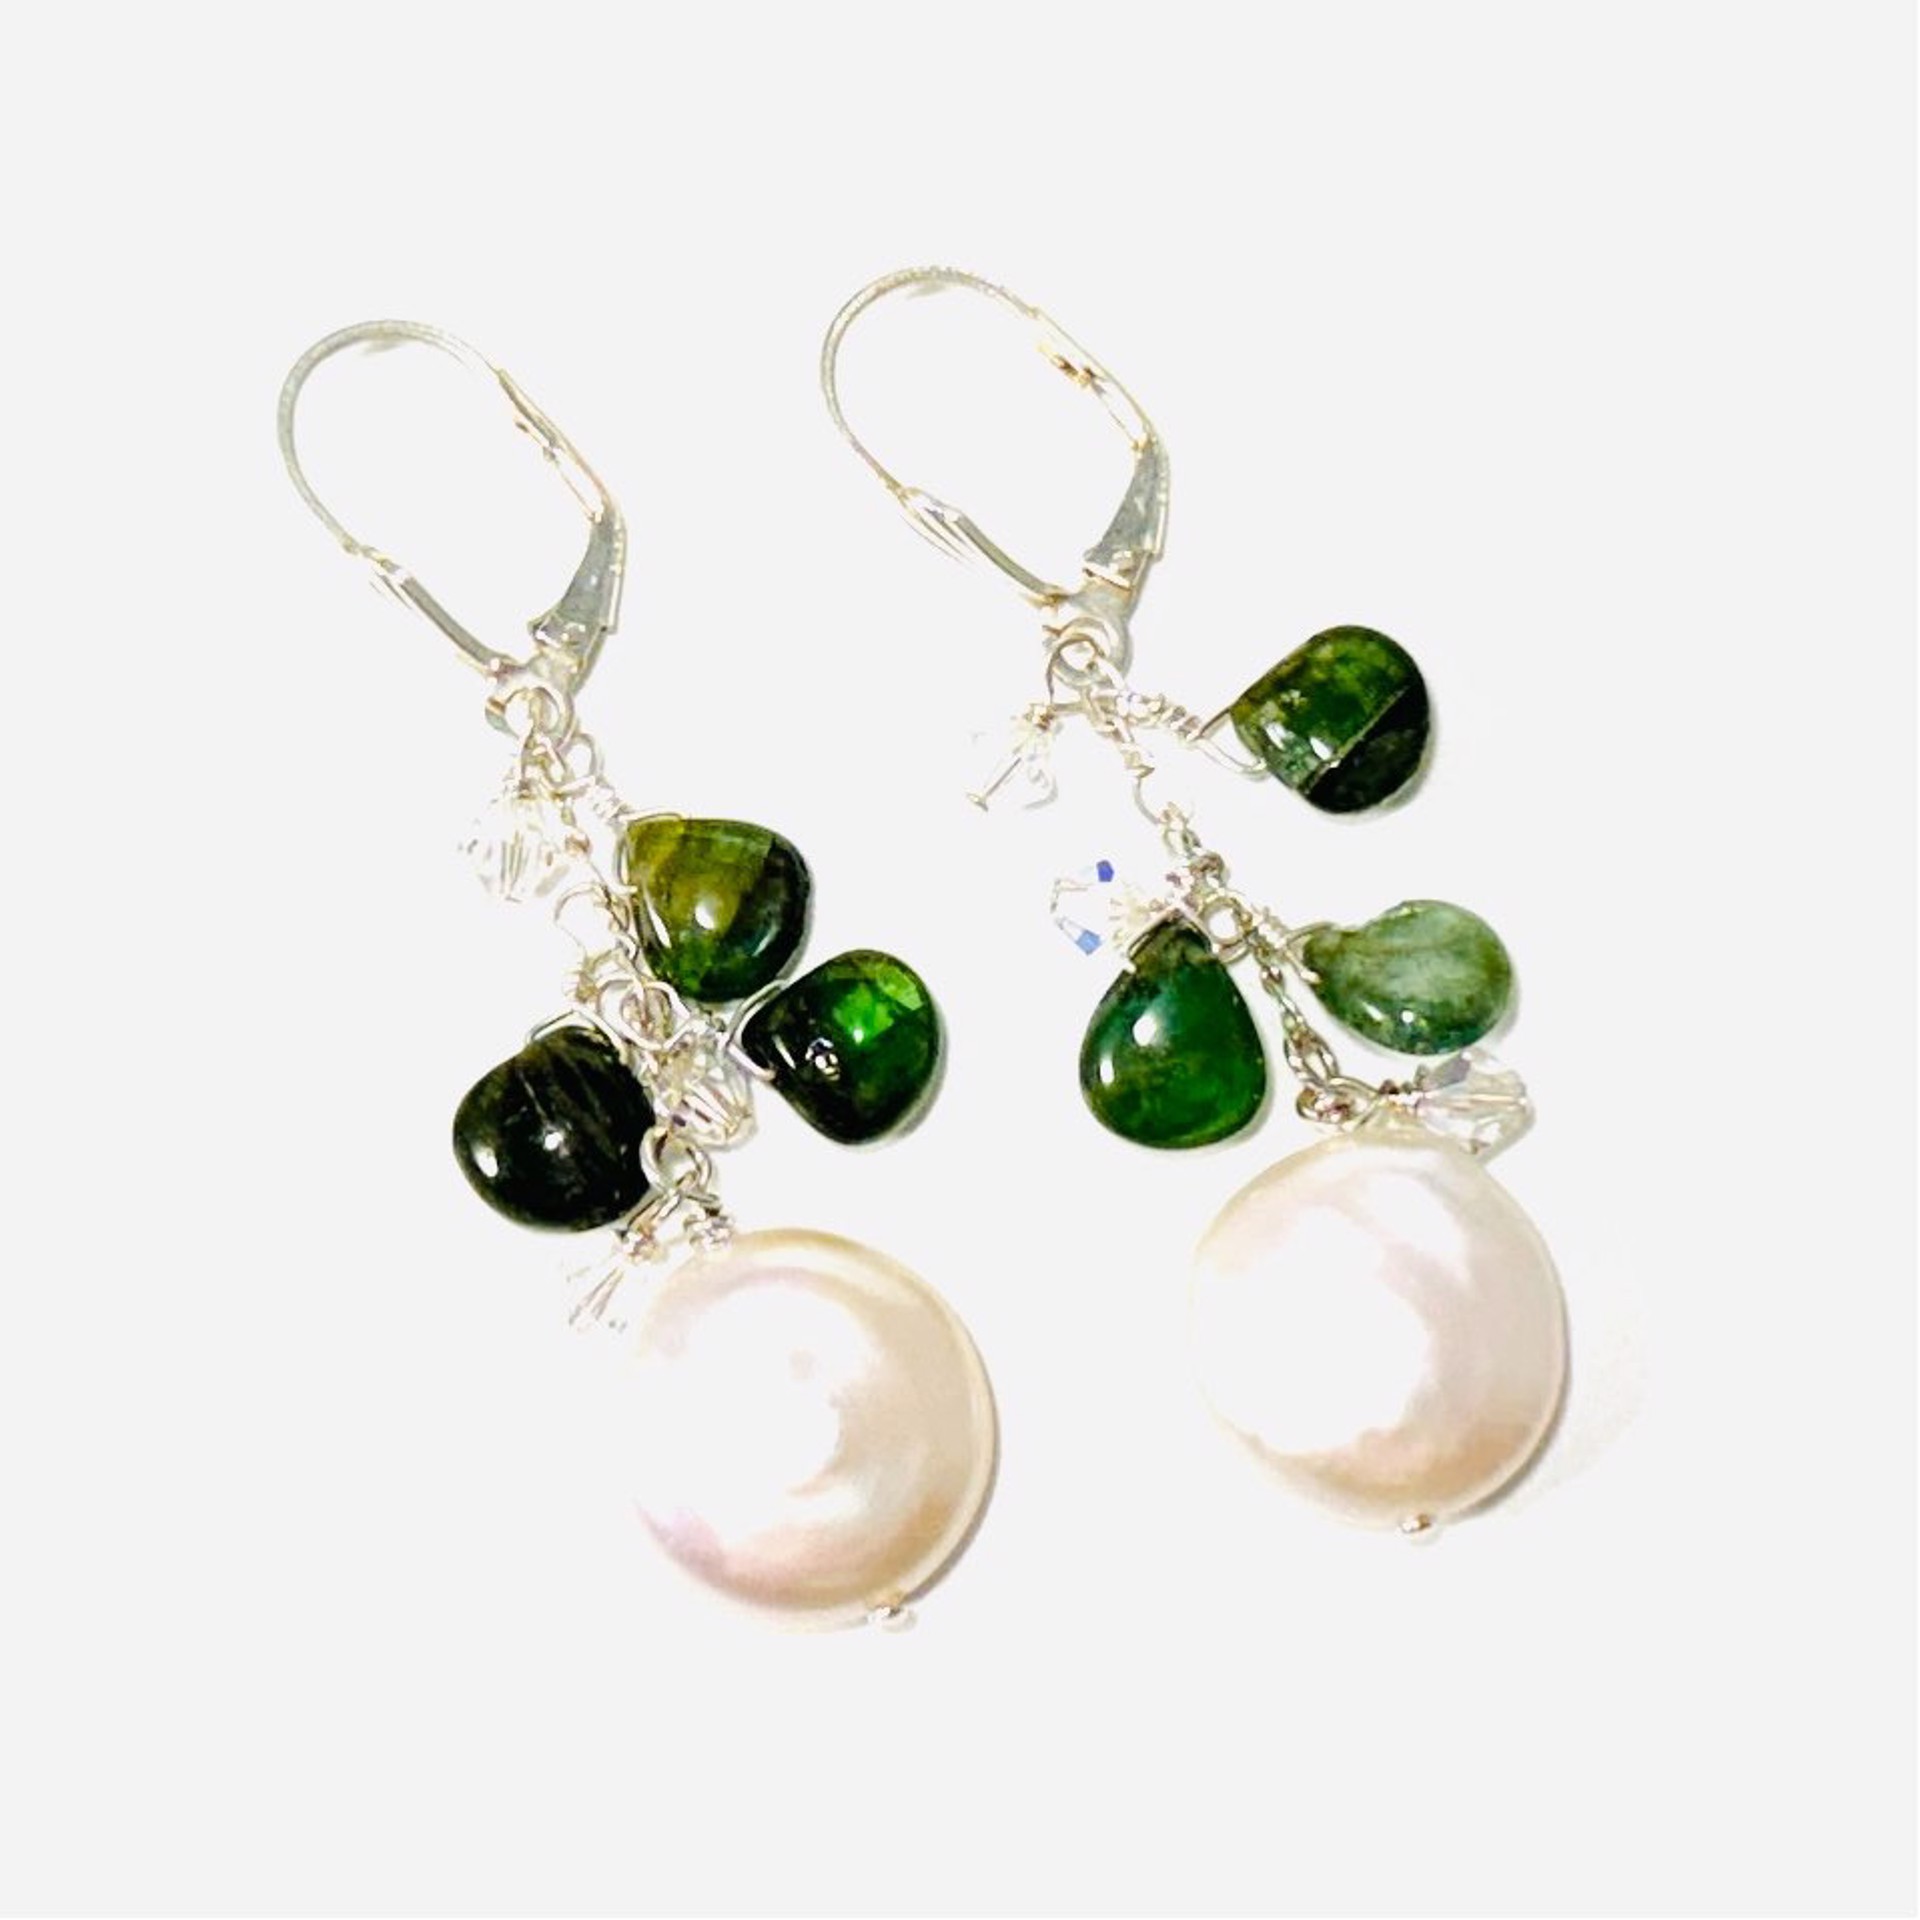 Coin Pearl, Tourmaline, Crystal Earrings LR24-12 by Legare Riano